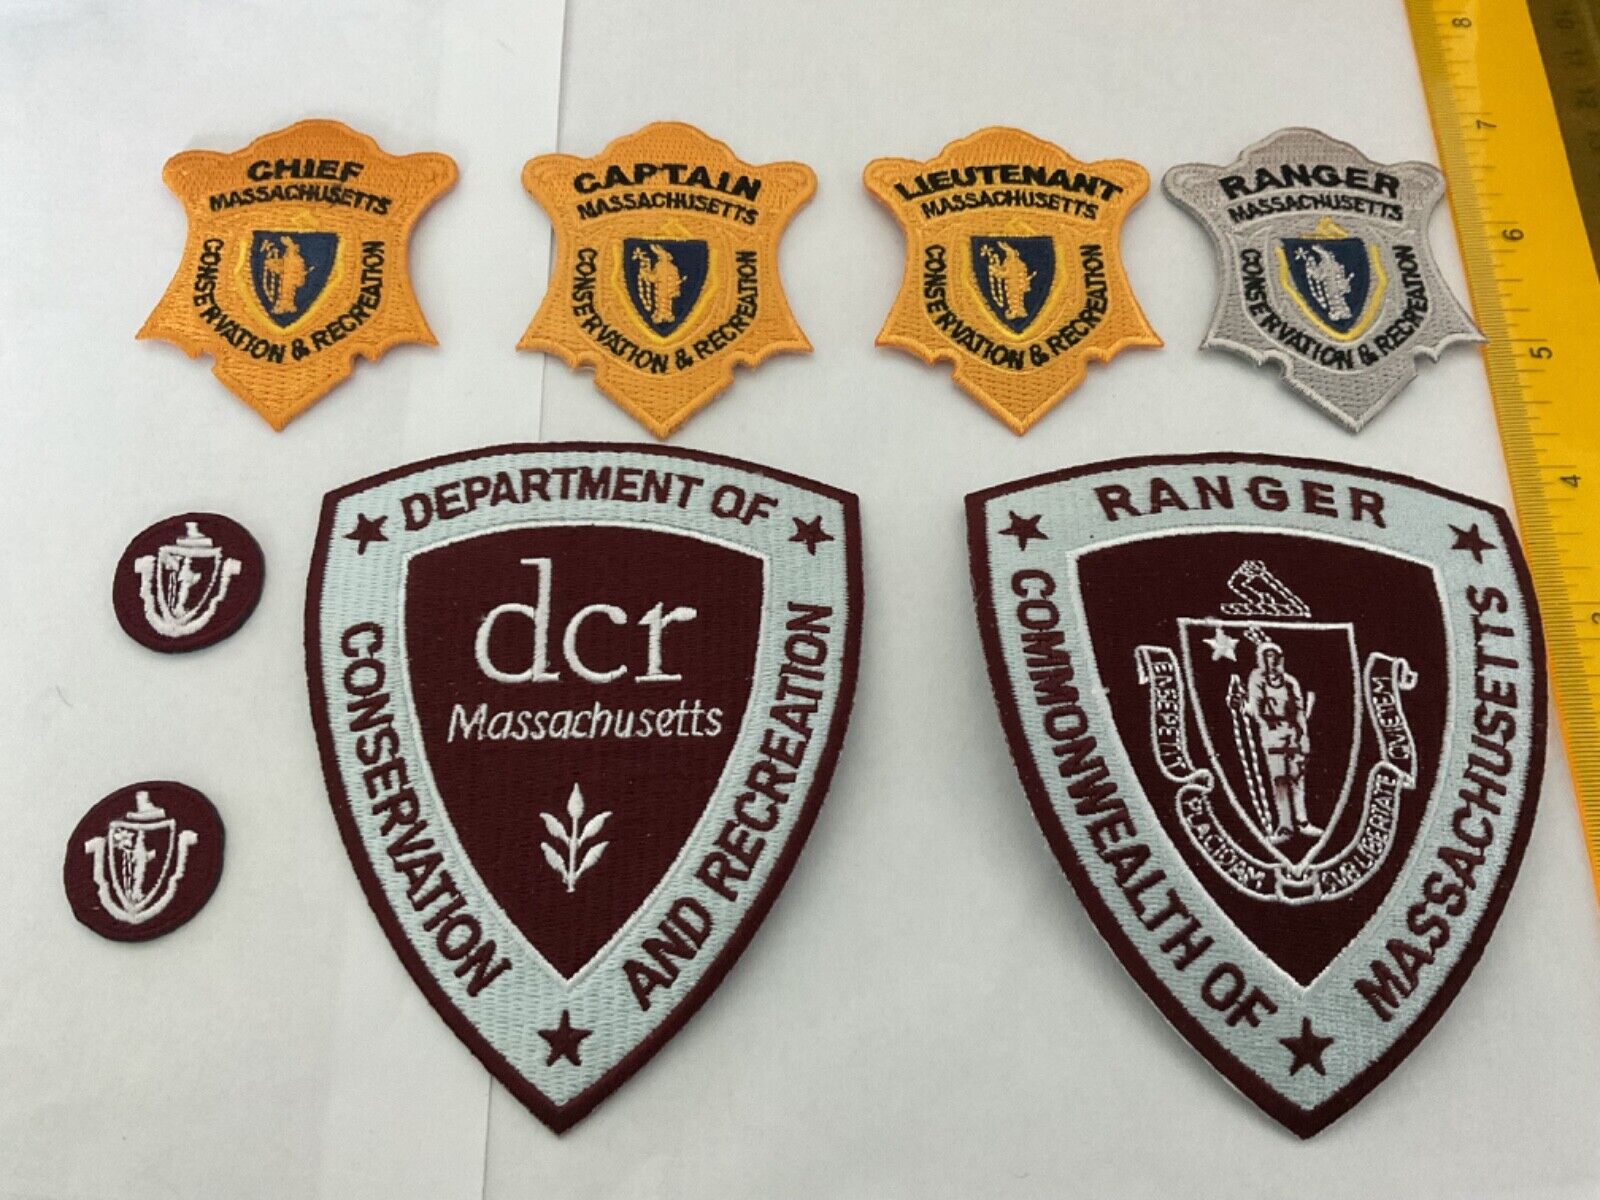 Massachusetts Department Of Conservation set collectible patches 8 new full size